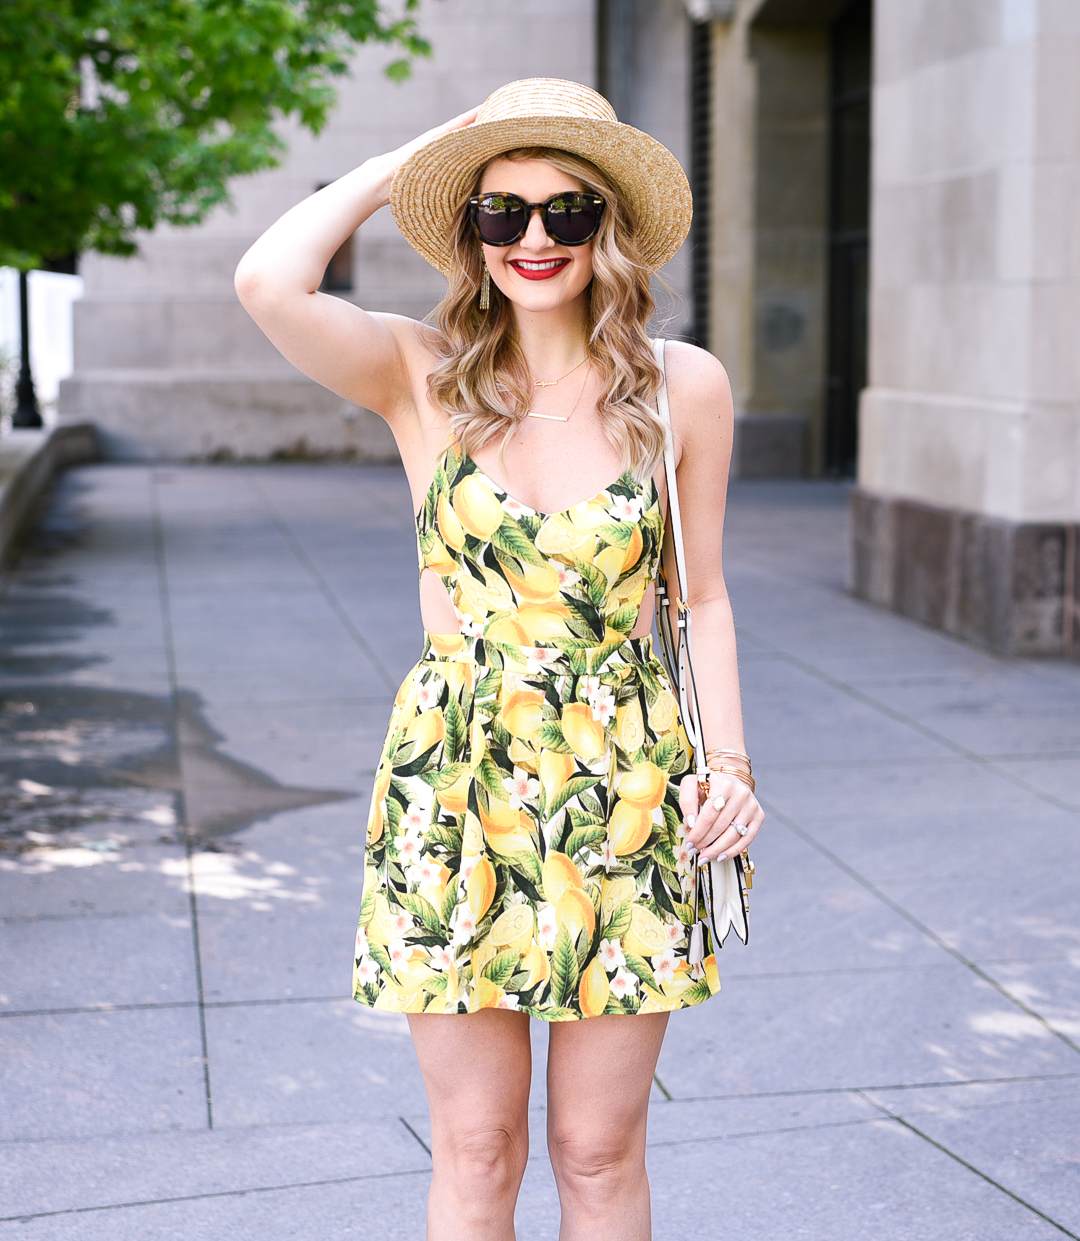 red liquid lipstick and a straw hat - summer outfit ideas